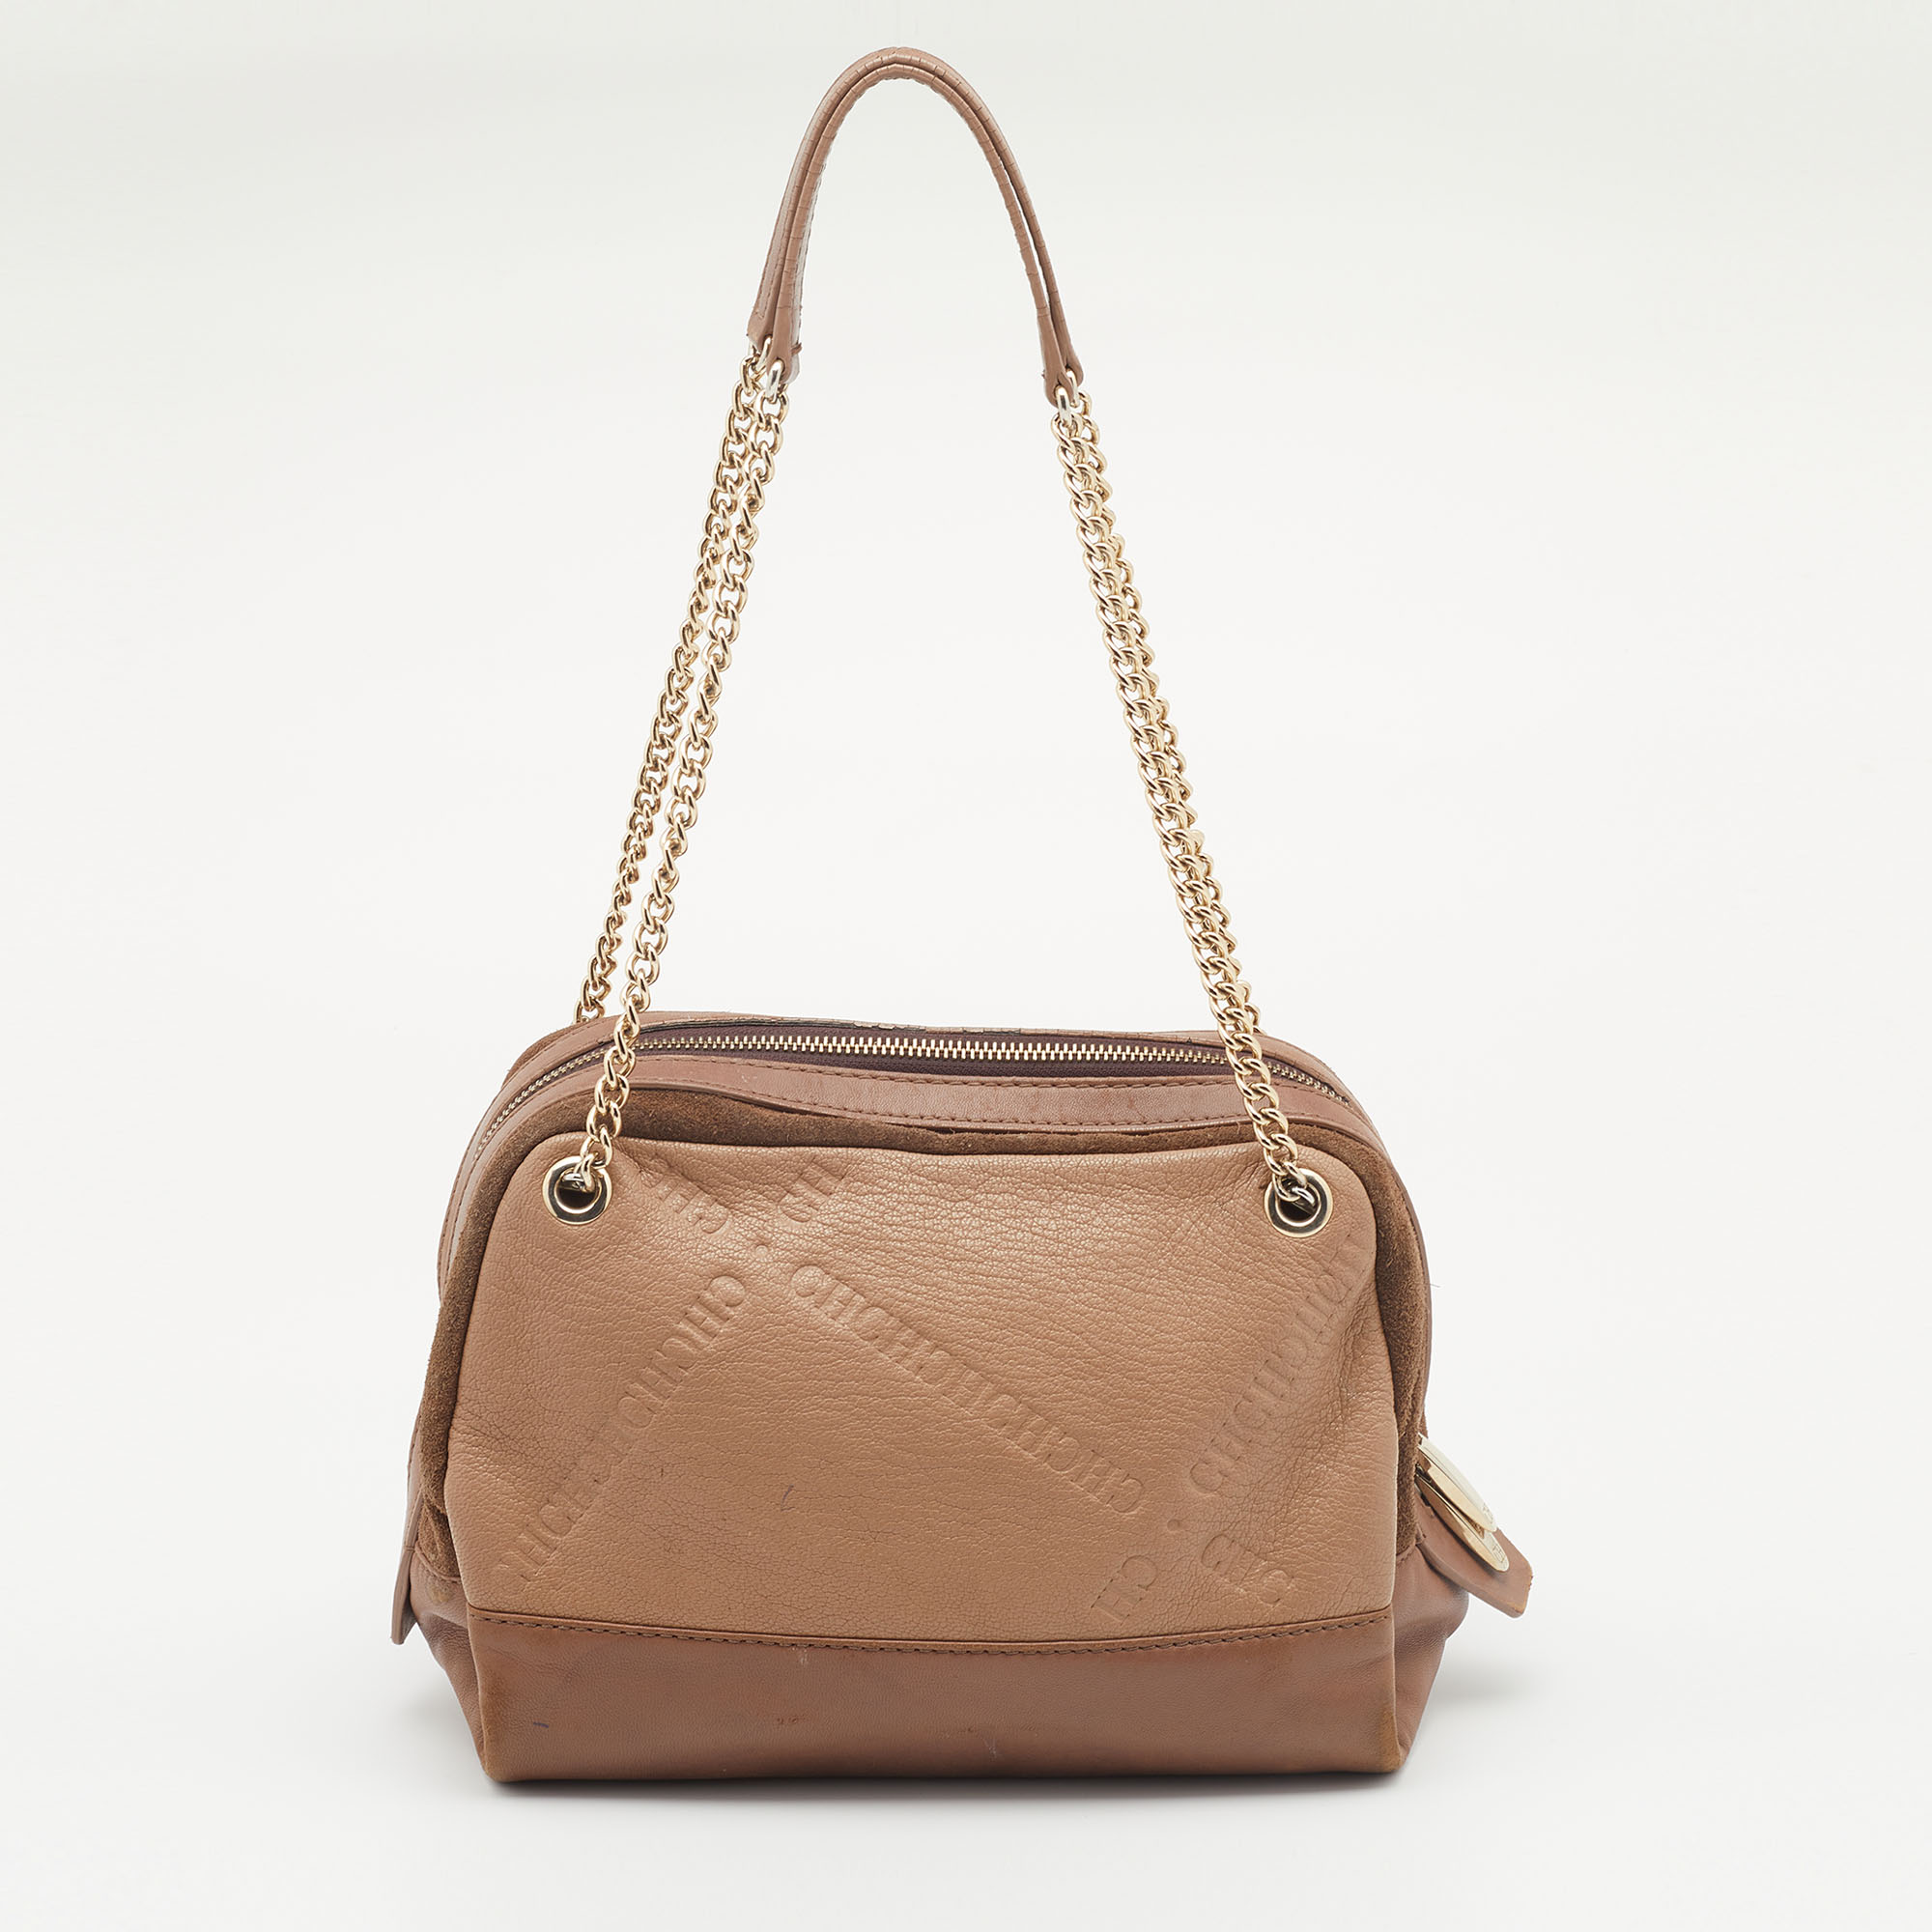 CH Carolina Herrera Brown Leather And Suede Chain Satchel